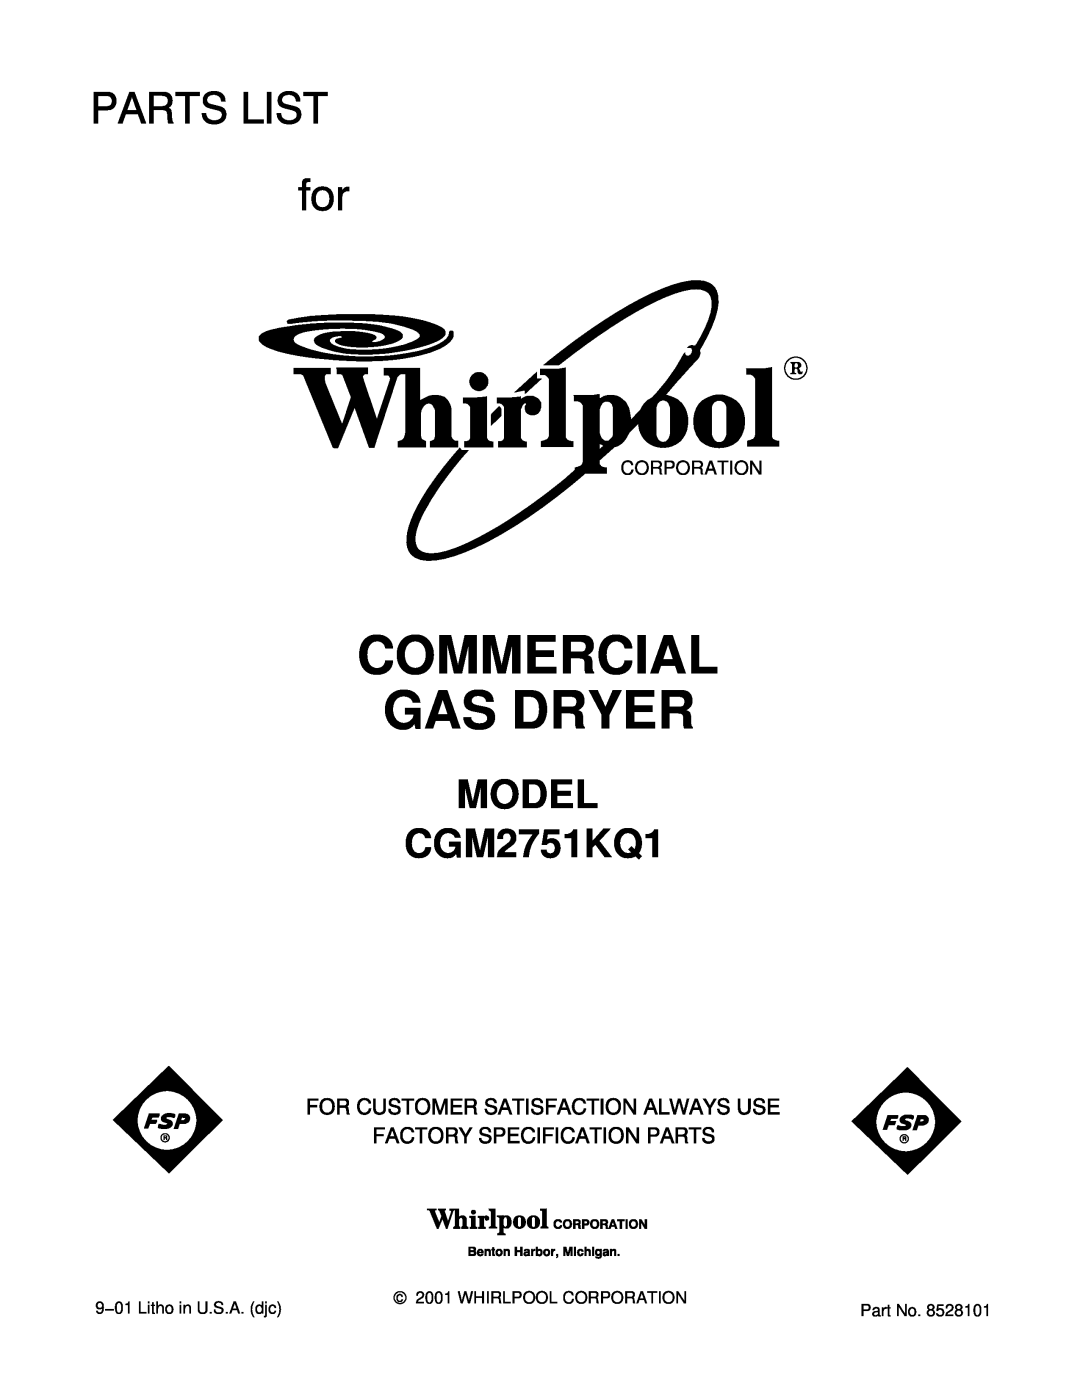 Whirlpool manual Corporation, Commercial Gas Dryer, MODEL CGM2751KQ1 